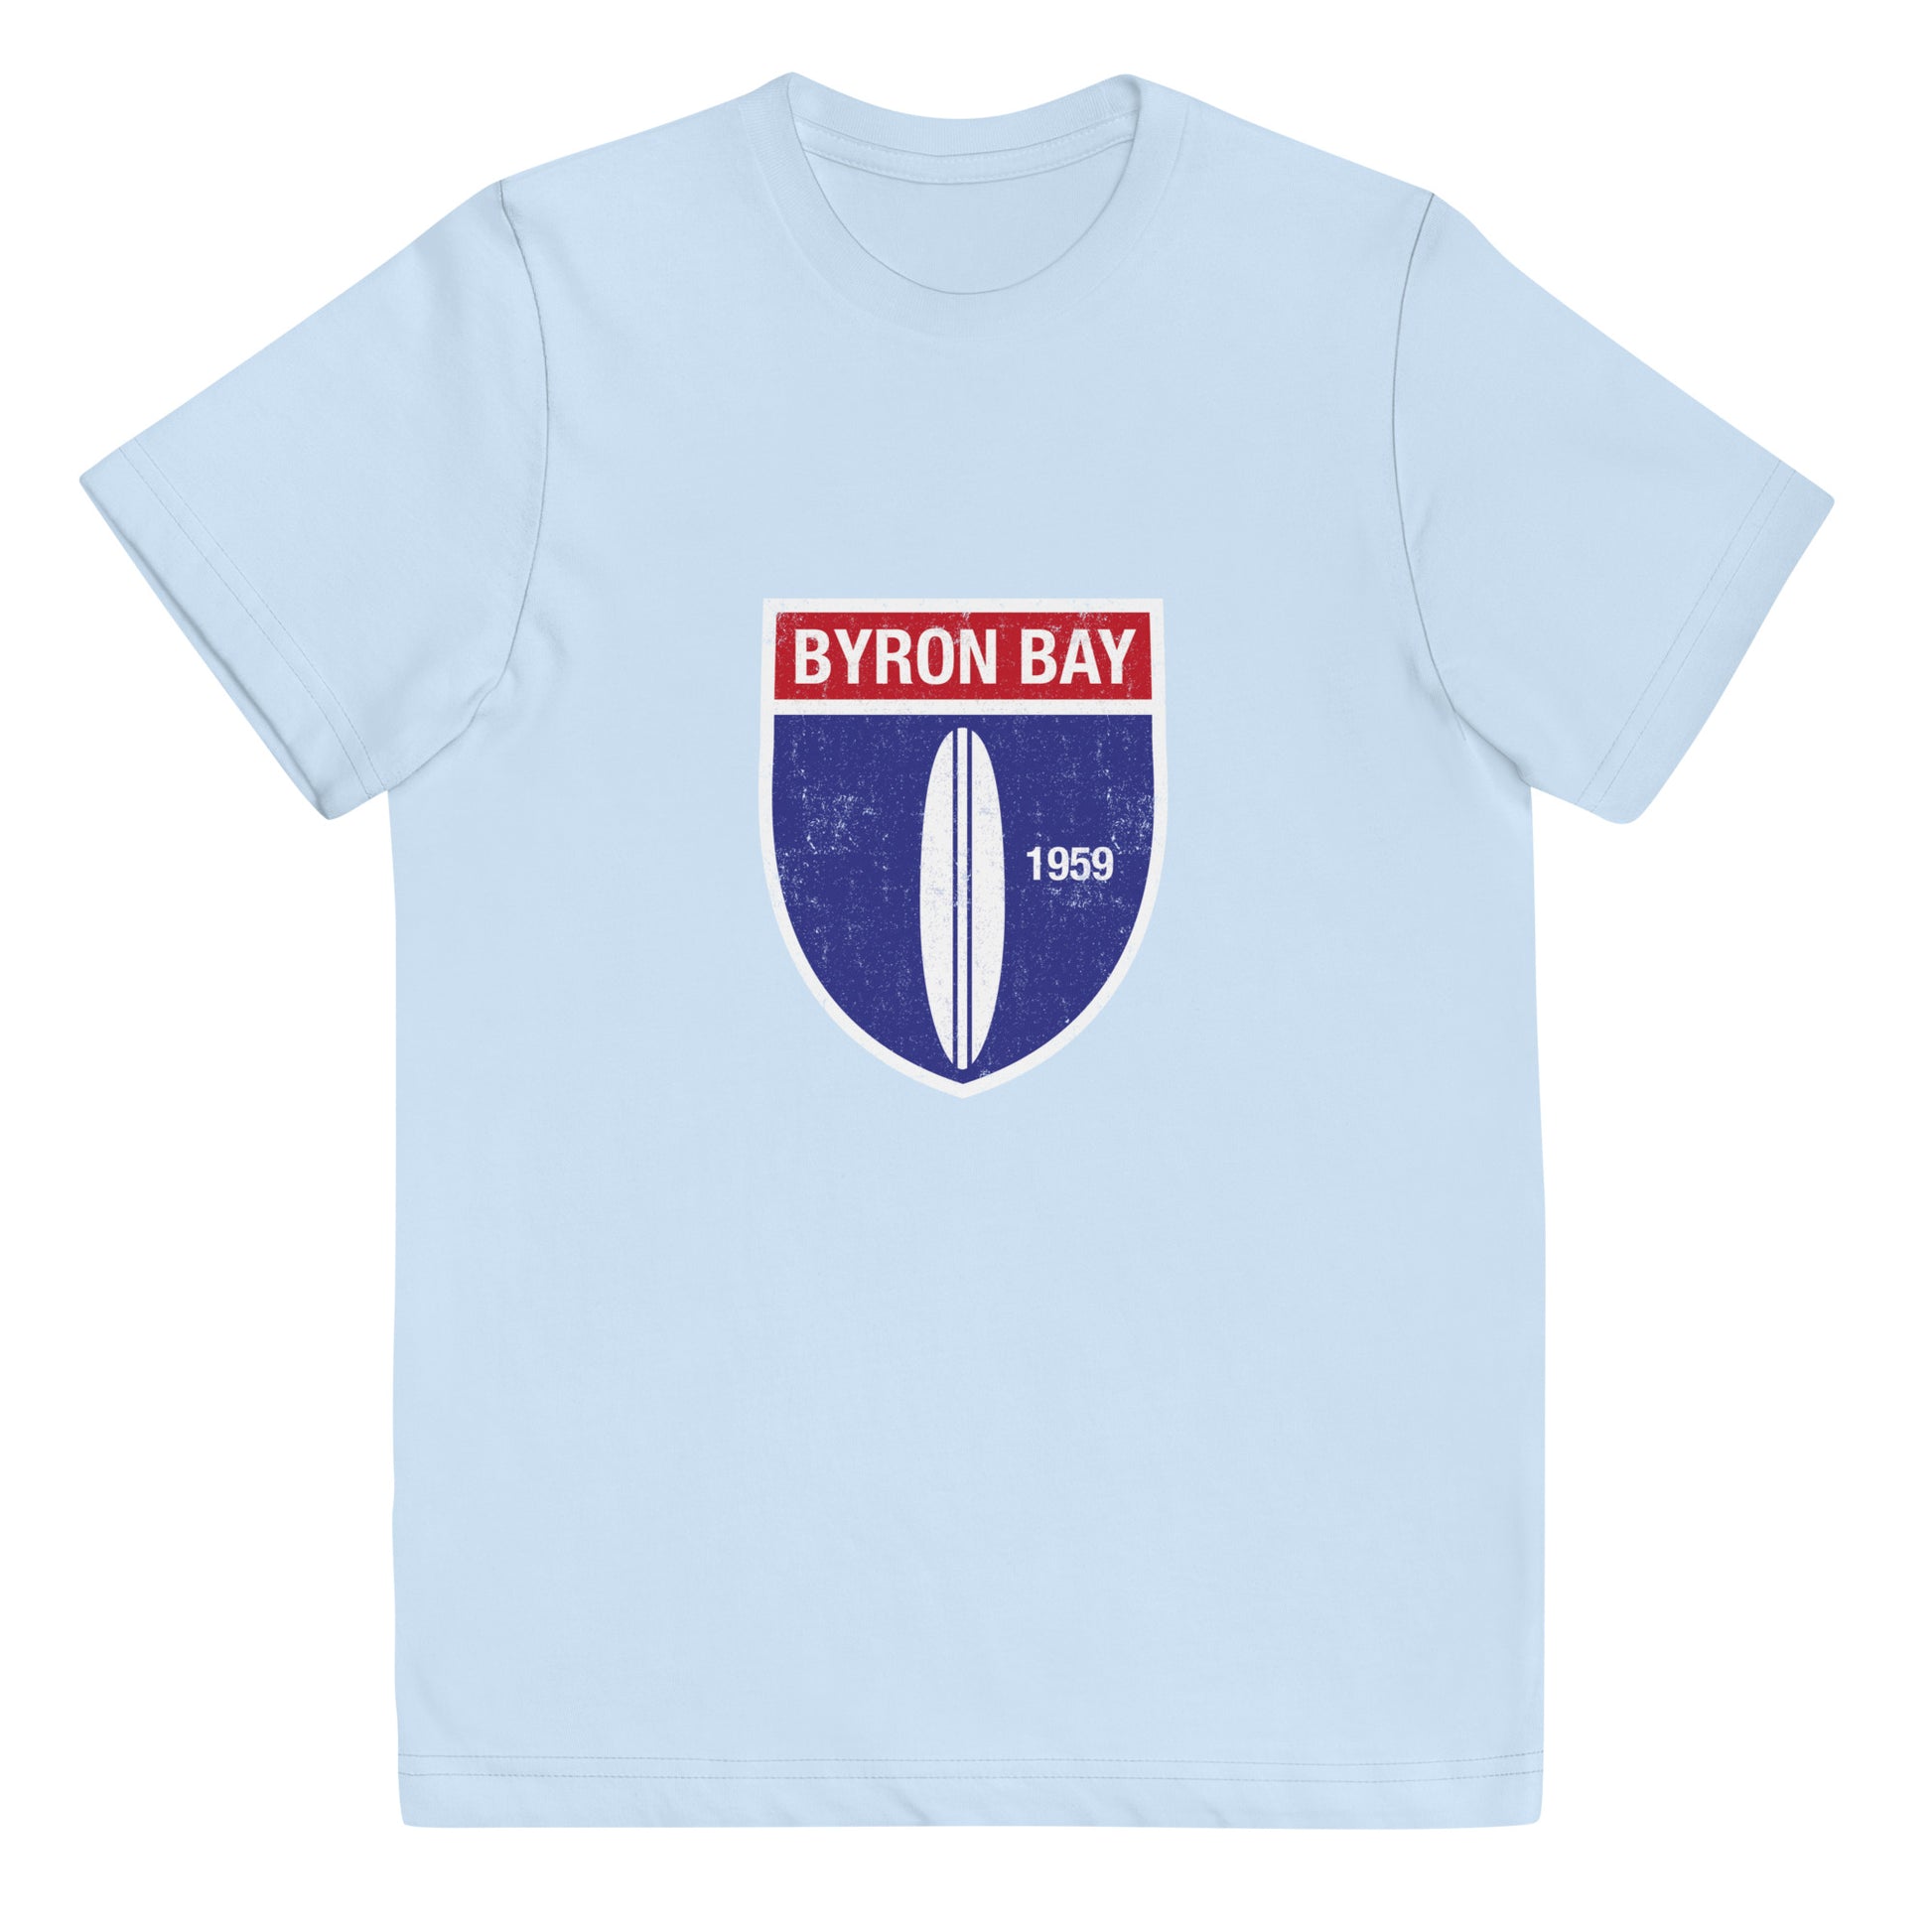  Kids T-Shirt - Light Blue colour - Front flat lay view - Byron Bay Vintage Surfboard 1959 design on front - Genuine Byron Bay Merchandise | Produced by Go Sea Kayak Byron Bay 